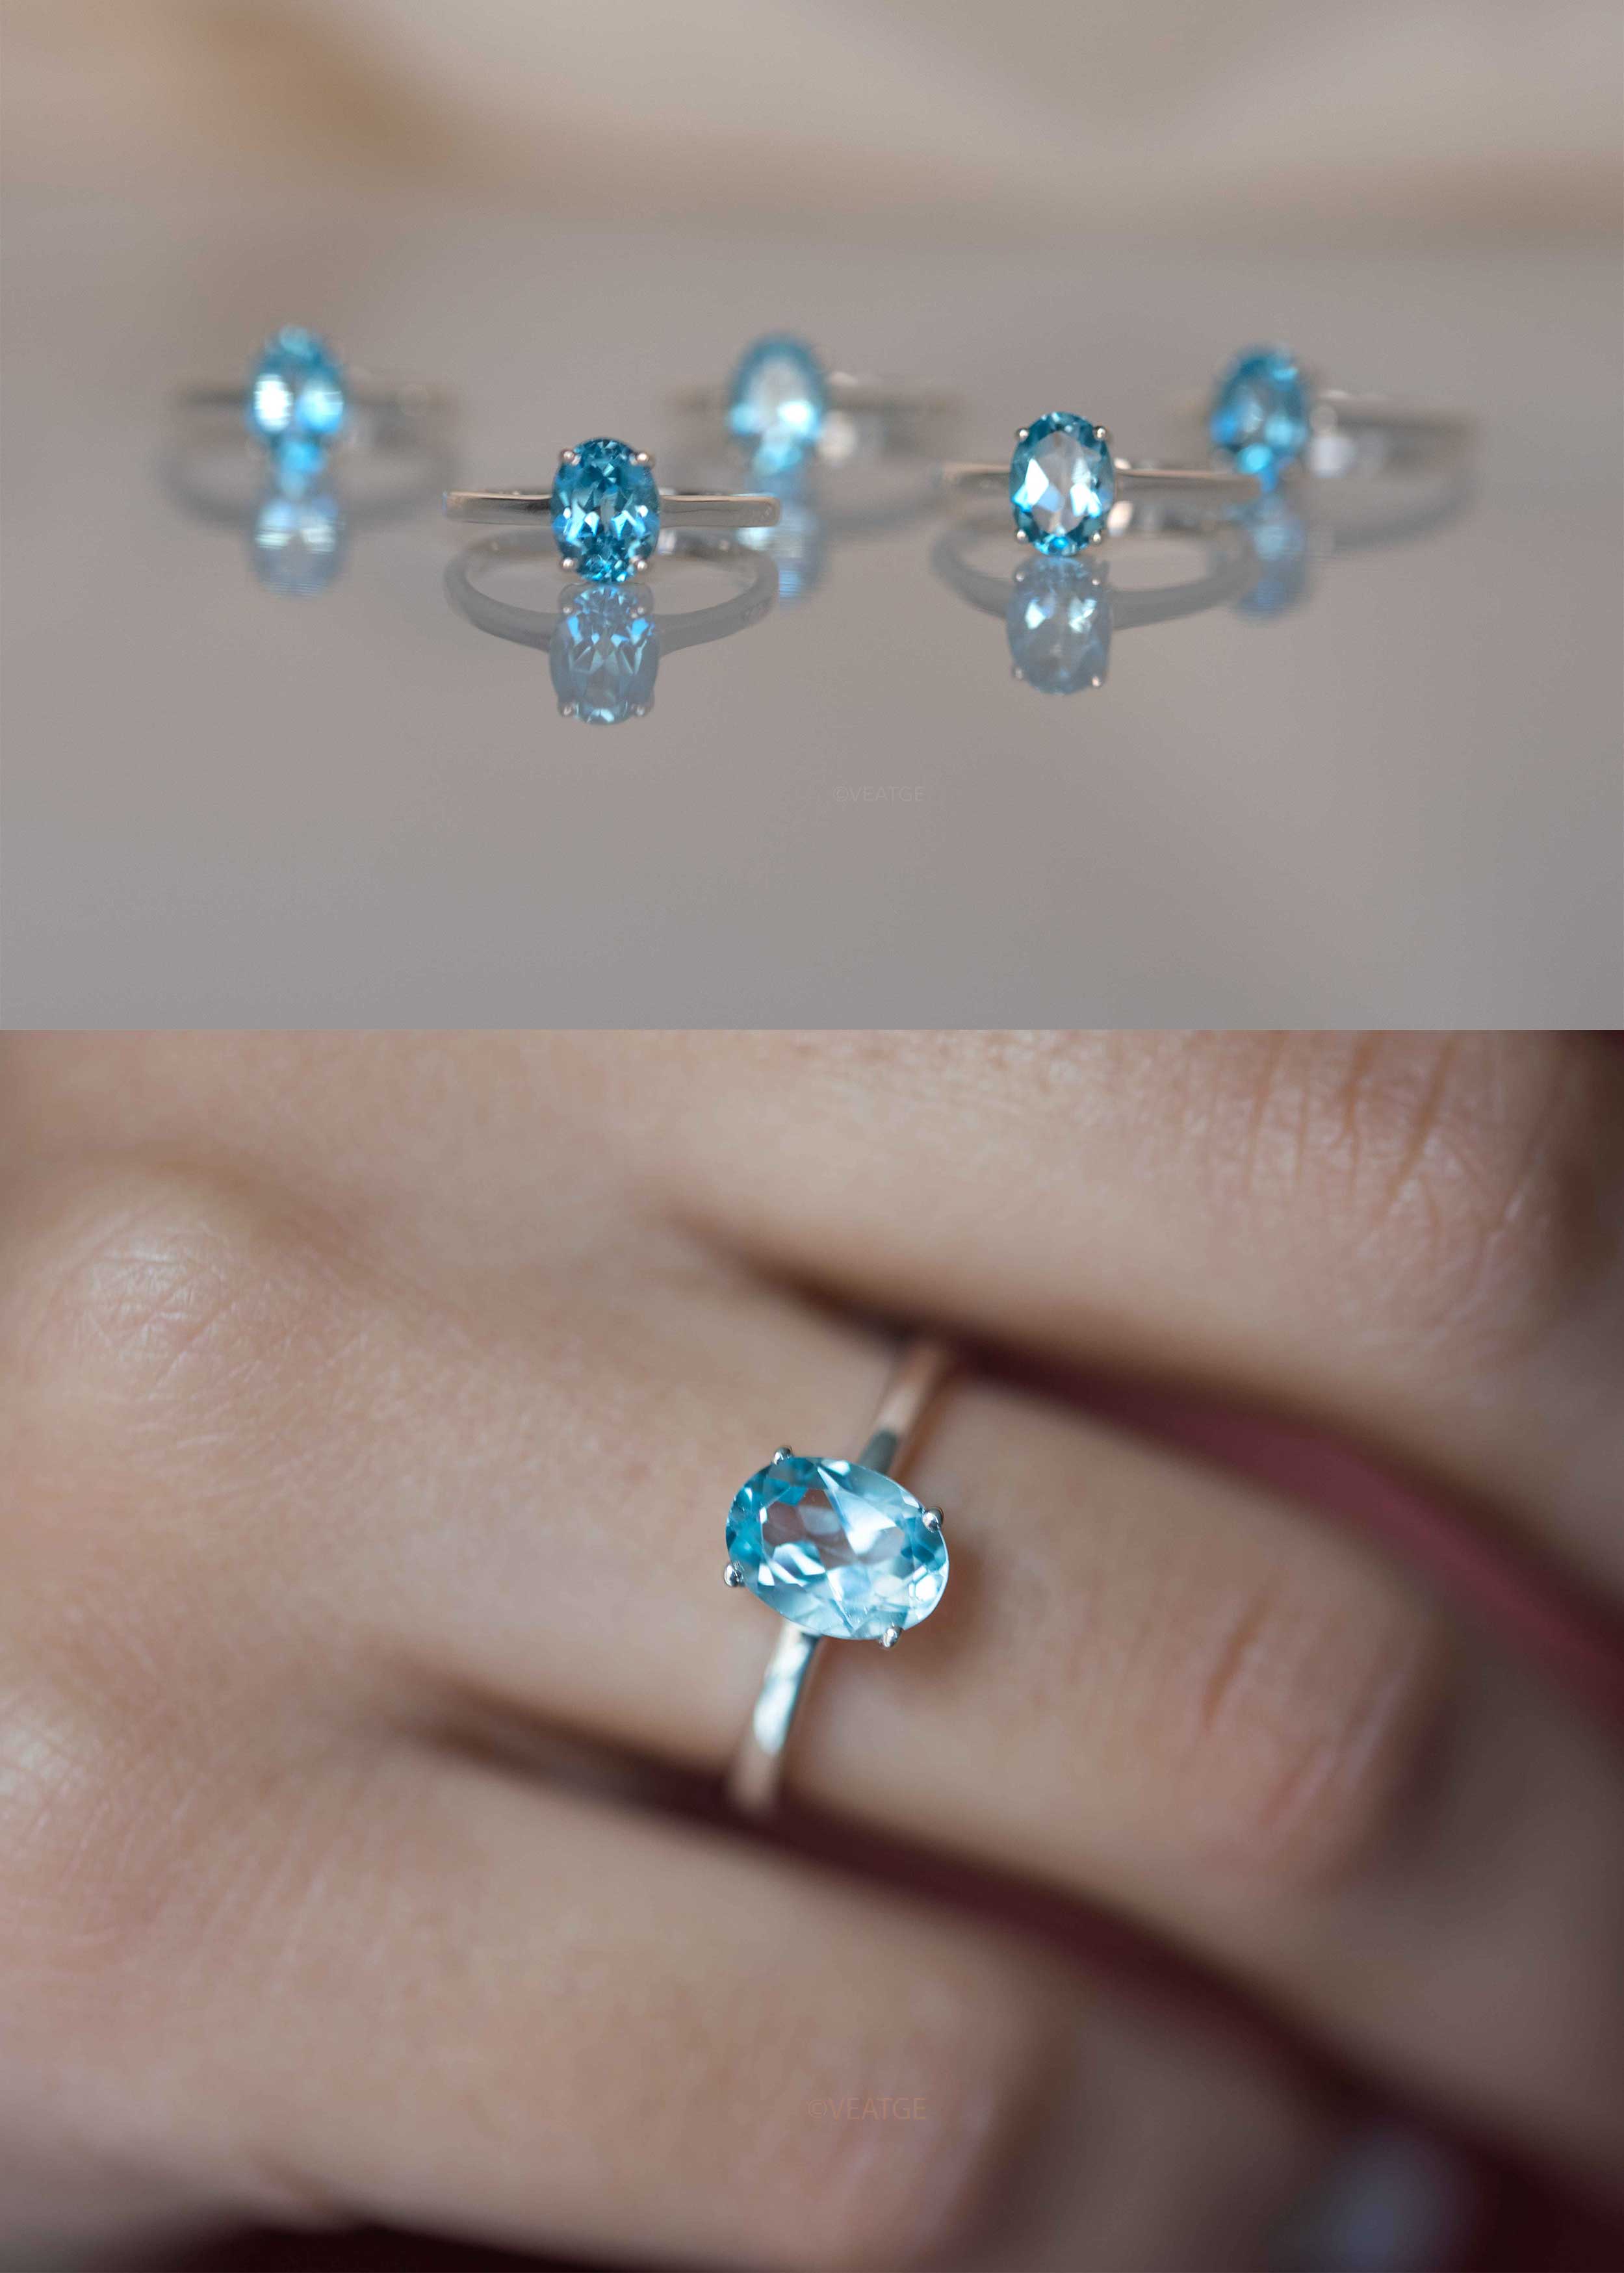 Swiss Blue Topaz Ring, 925 Sterling Silver Solitaire Ring, December  Birthstone Gift Ring, Engagement Ring, Wedding Ring, Blue Topaz Jewelry,  Nickel